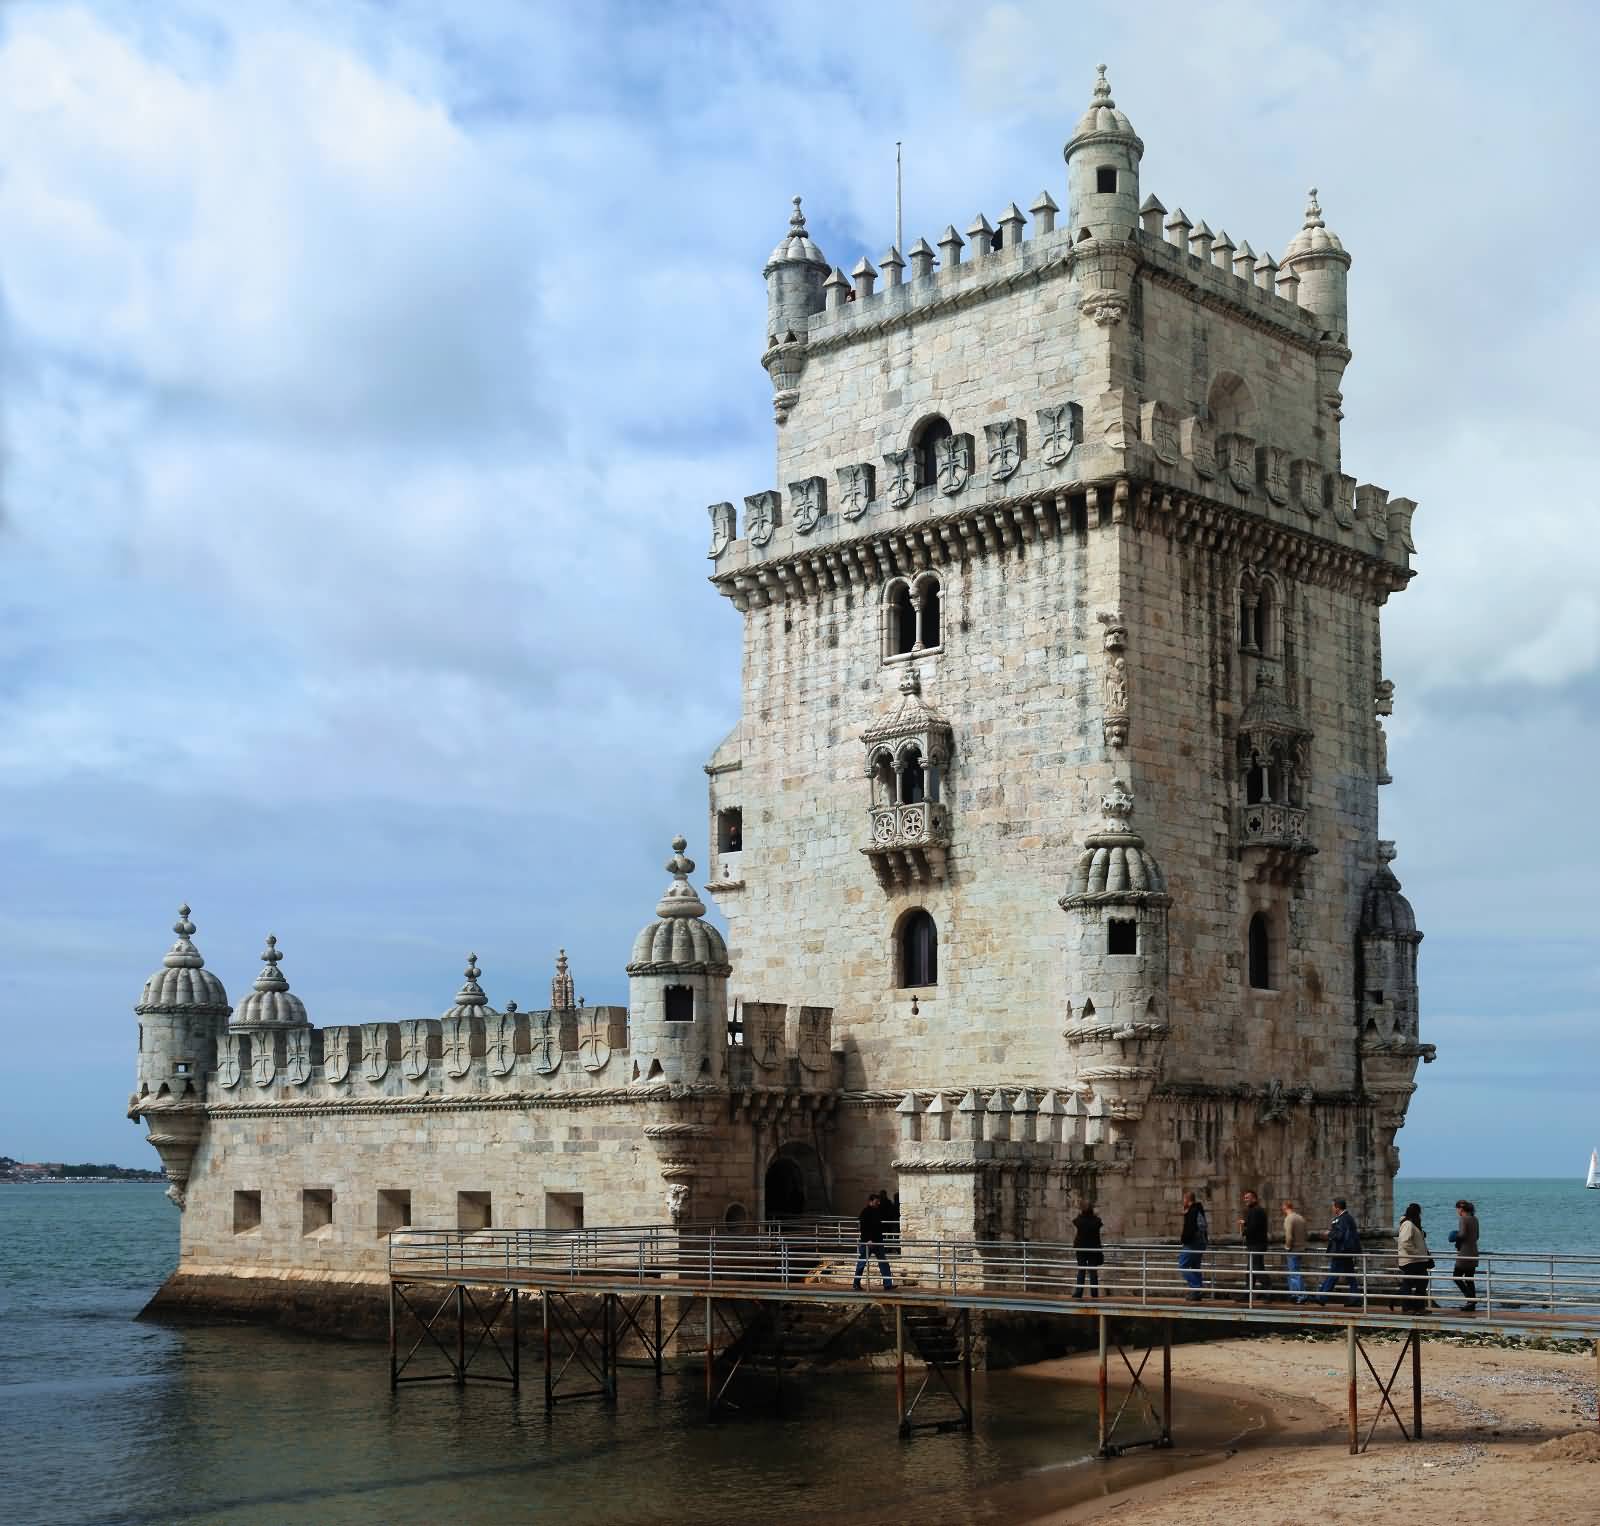 Side View Of Belem Tower In Portugal